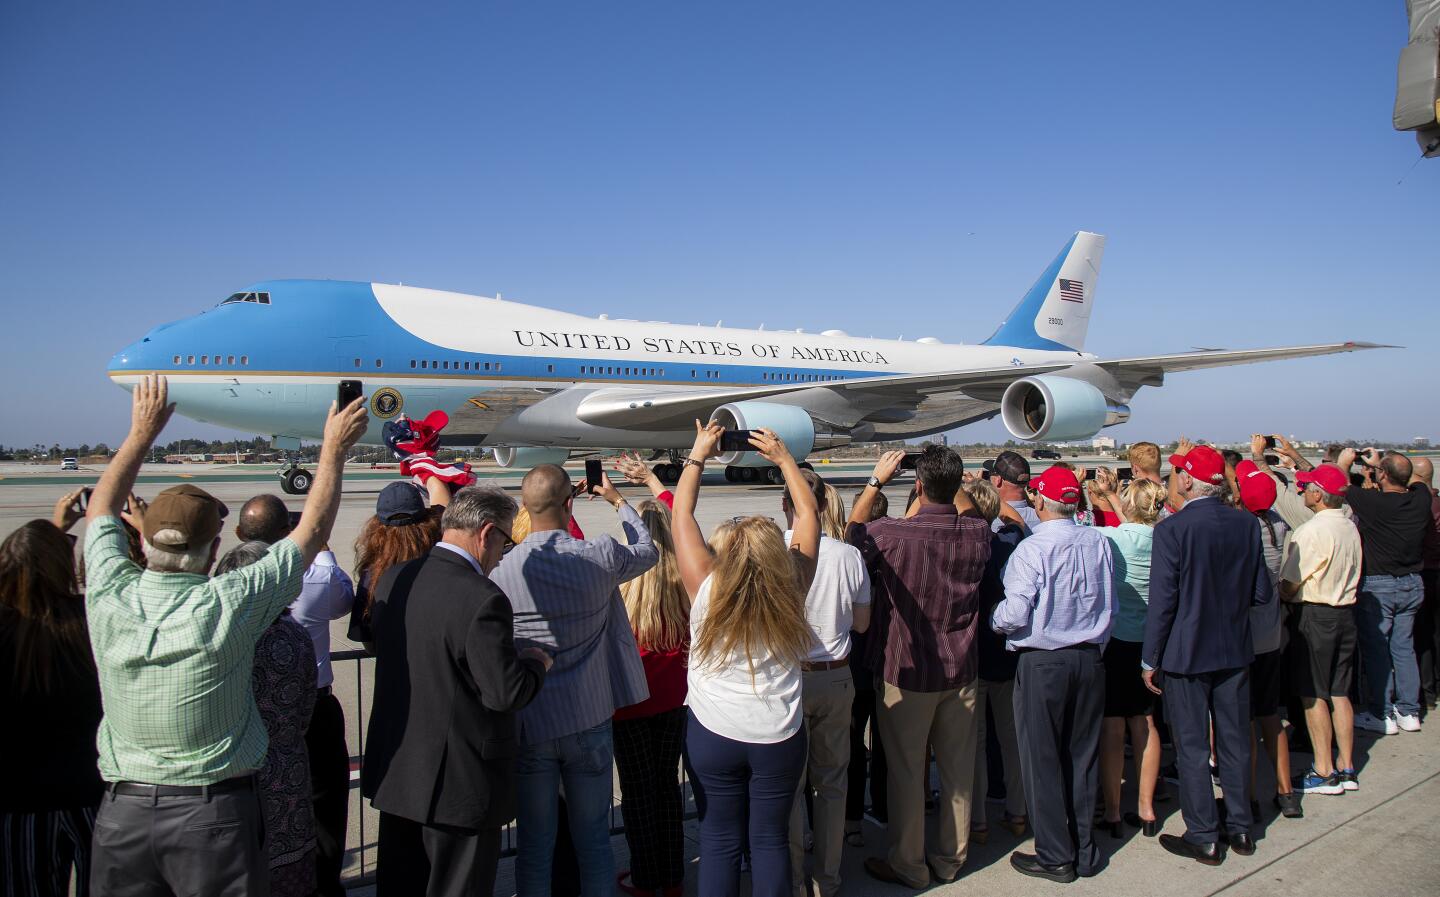 People greet Air Force One at LAX